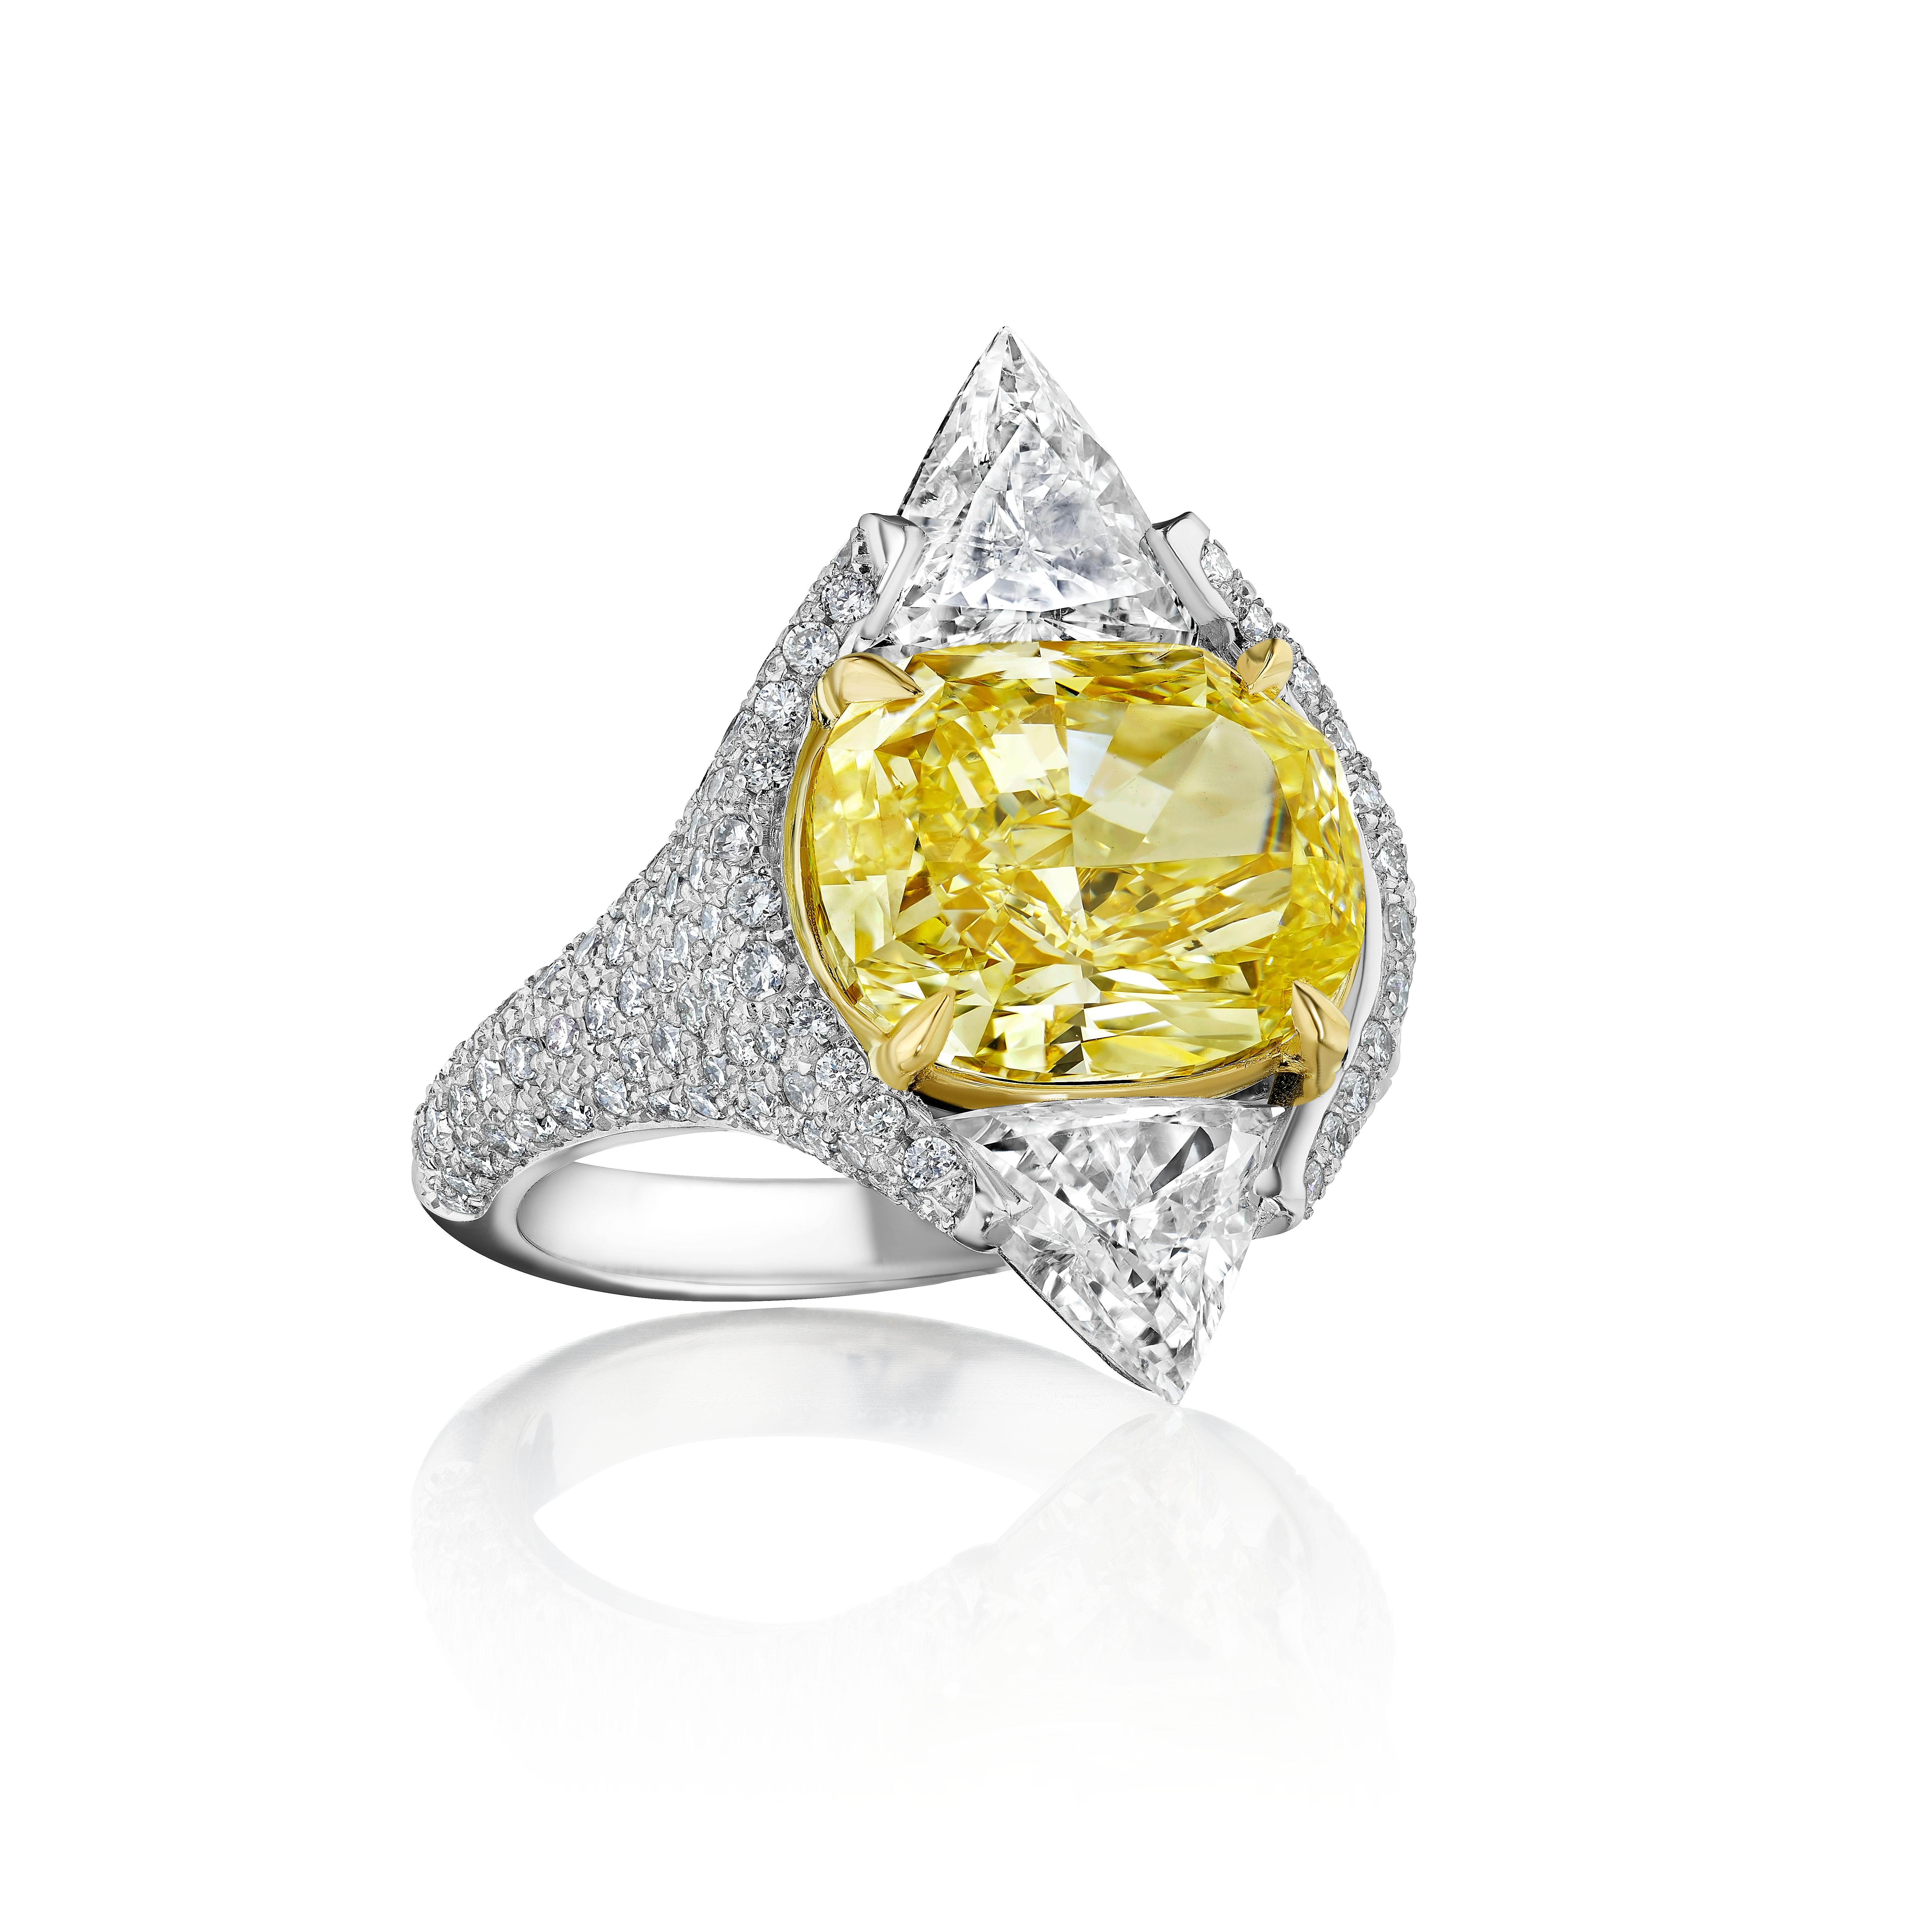 A ultra unique Yellow Diamond Ring. 

Cushion Cut Diamond weighing 6.01 Carats with GIA certificate, graded as Fancy Yellow and VS1 clarity. Triangles weighing 2.01 Carats. Round Diamonds weighing 1.02 Carats. Set in Platinum and 18 Karat Yellow